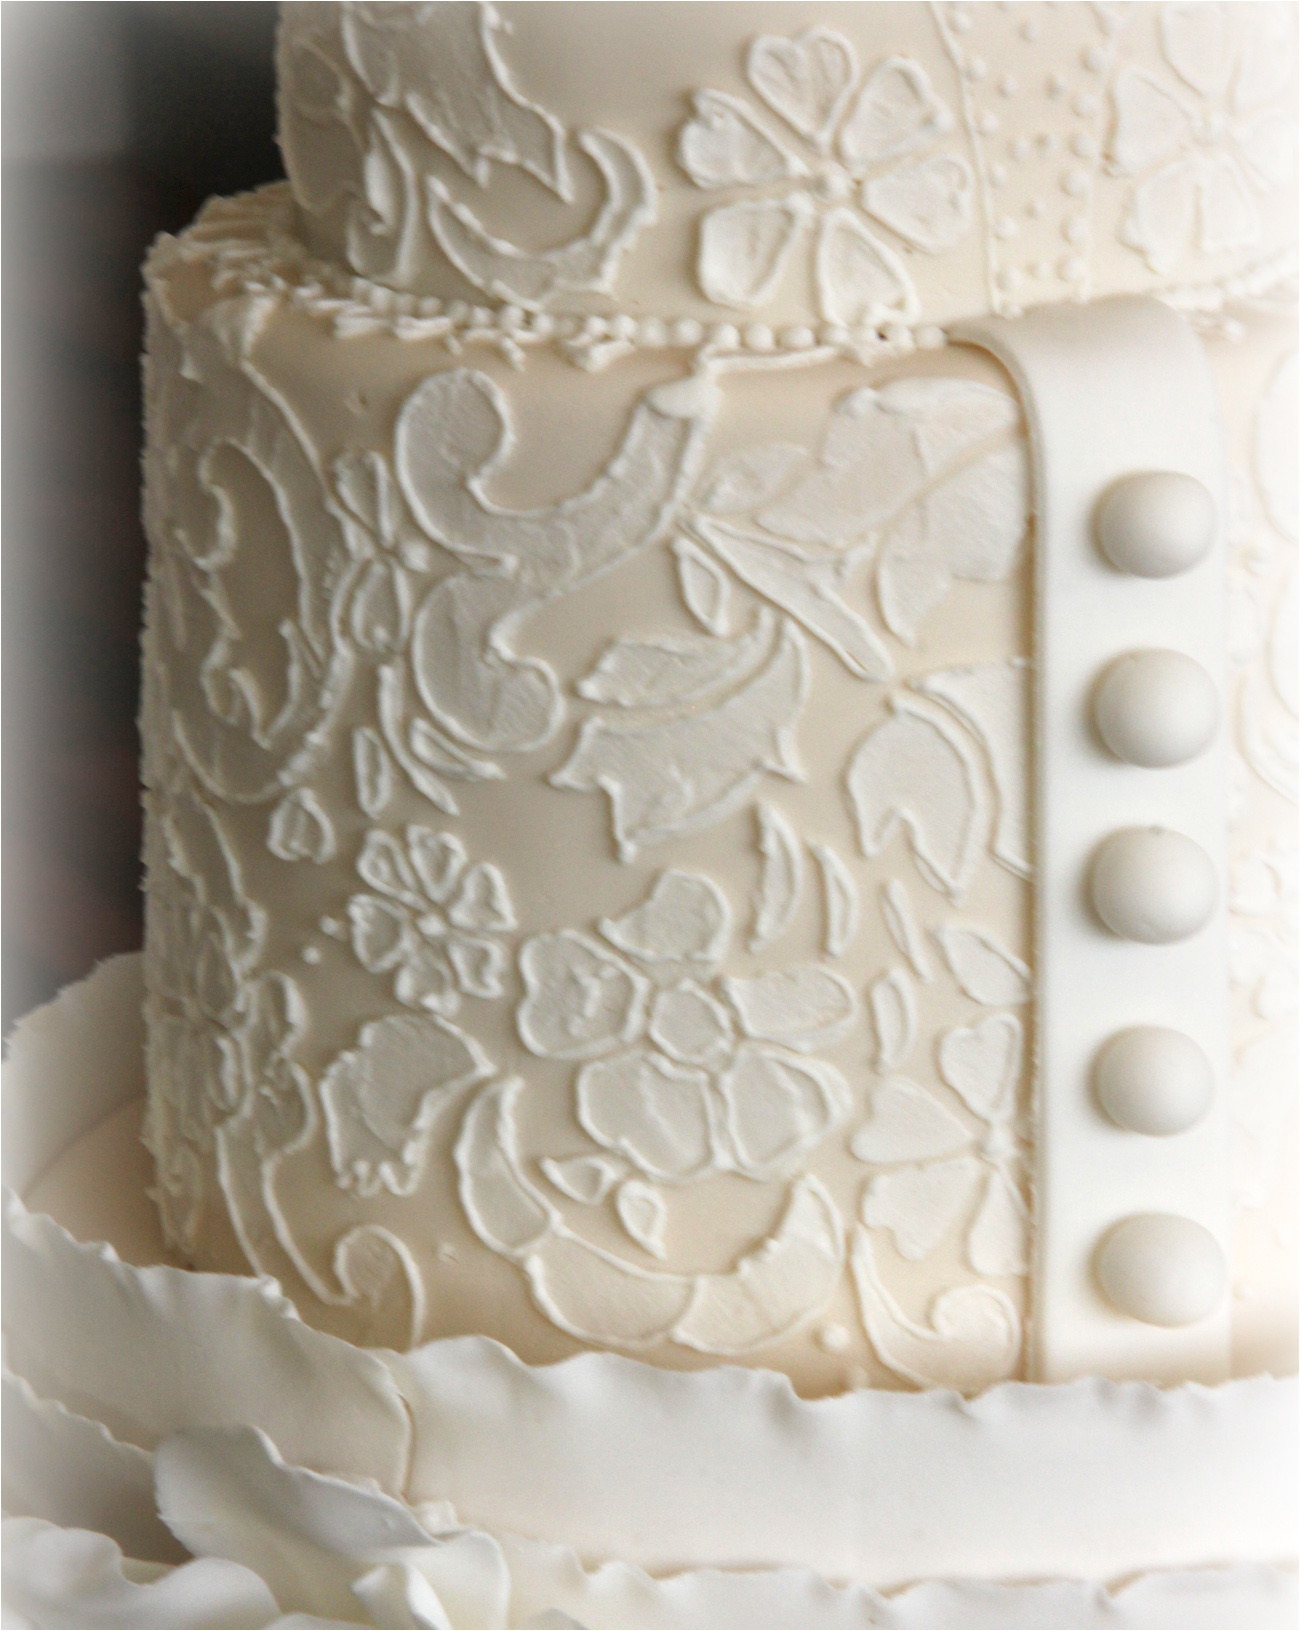 how to achieve a stunning lace effect on a cake using stencils and piping